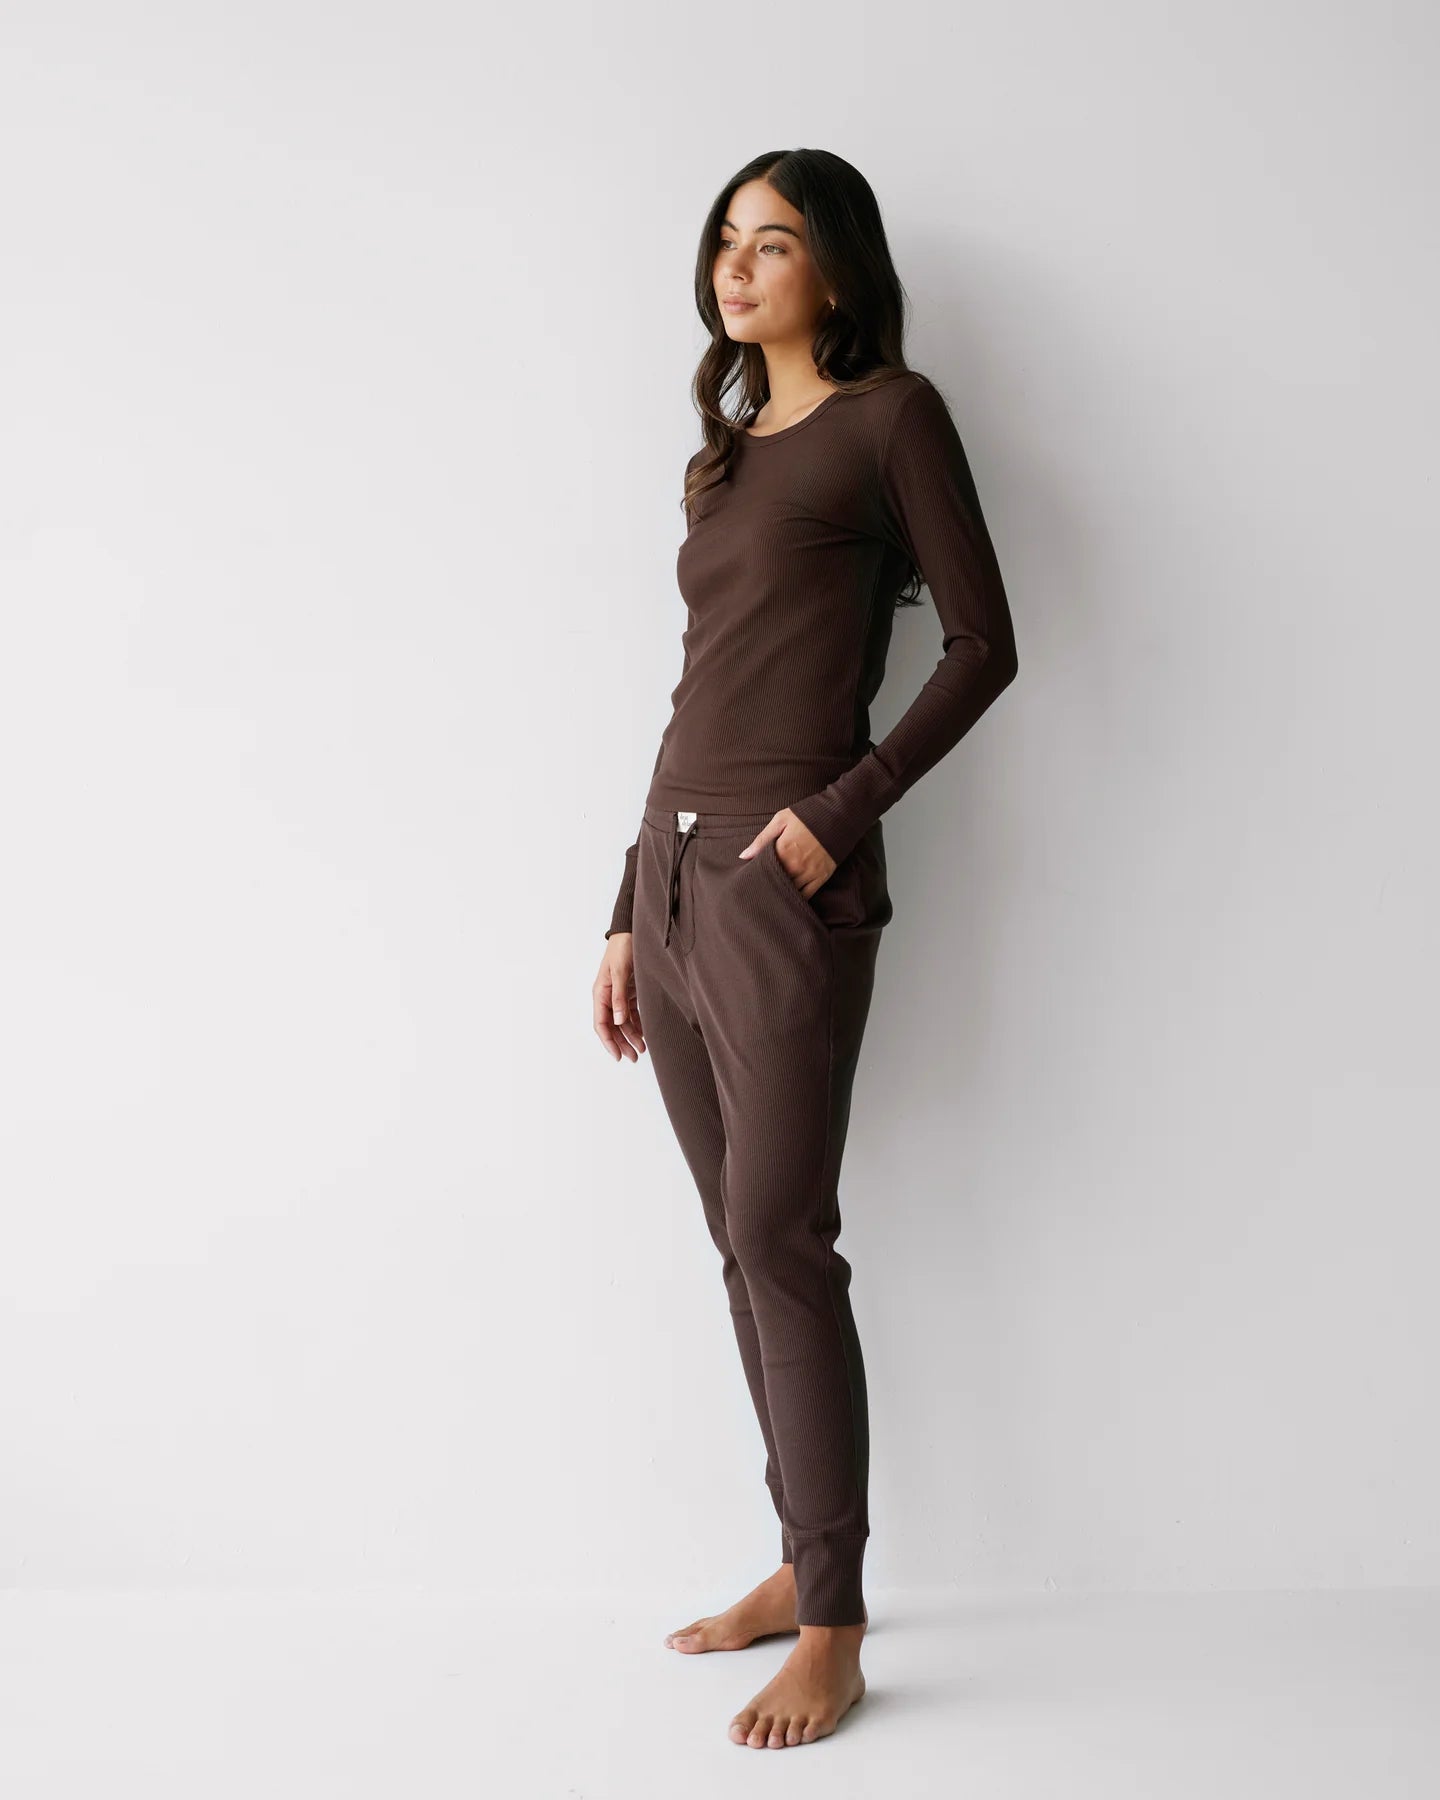 DEAR DYLAN // Slim Lounge Pant COCOA